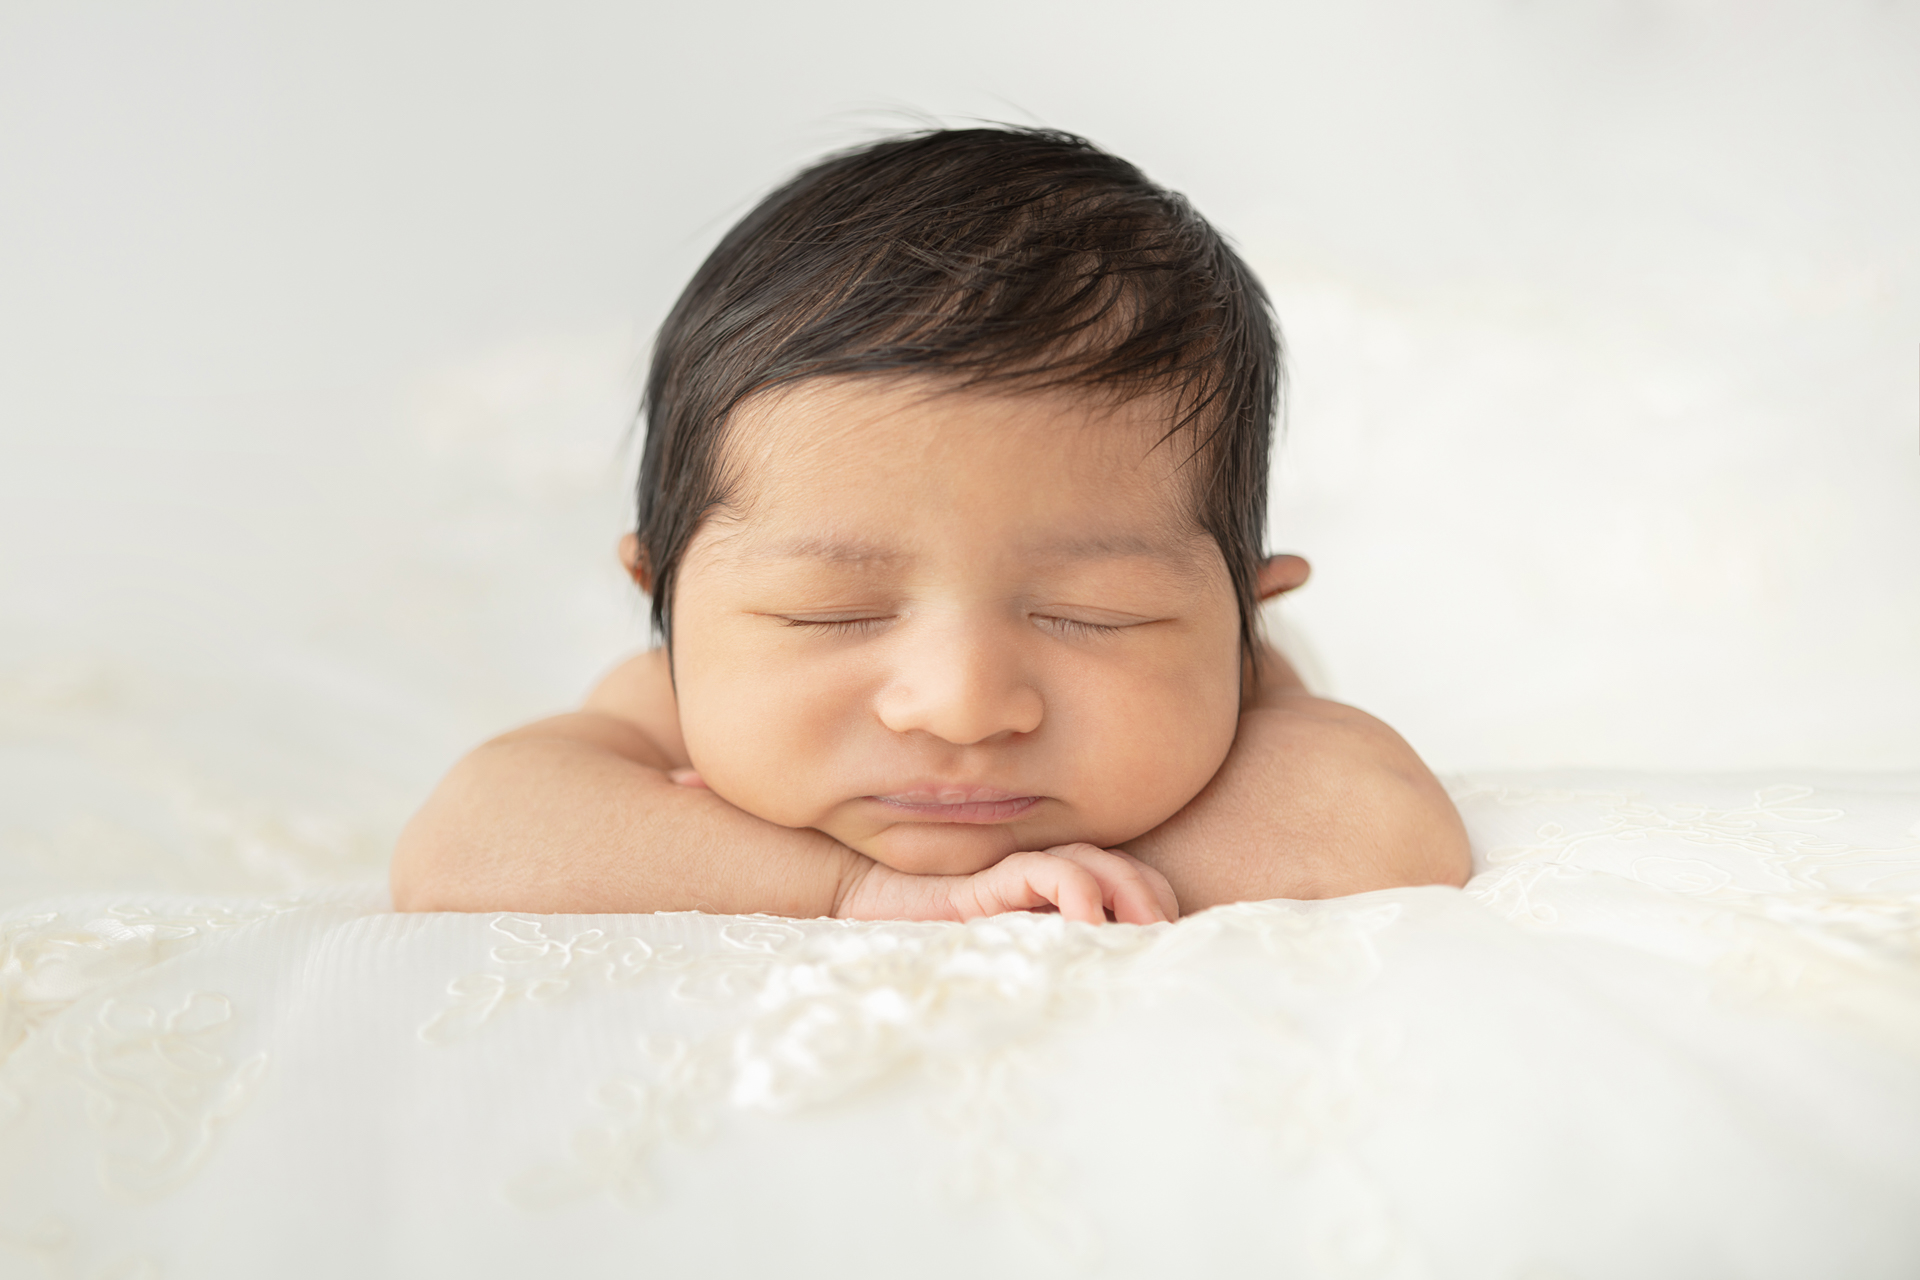 newborn baby girl with a head full of dark hair asleep with her head resting on her folded arms